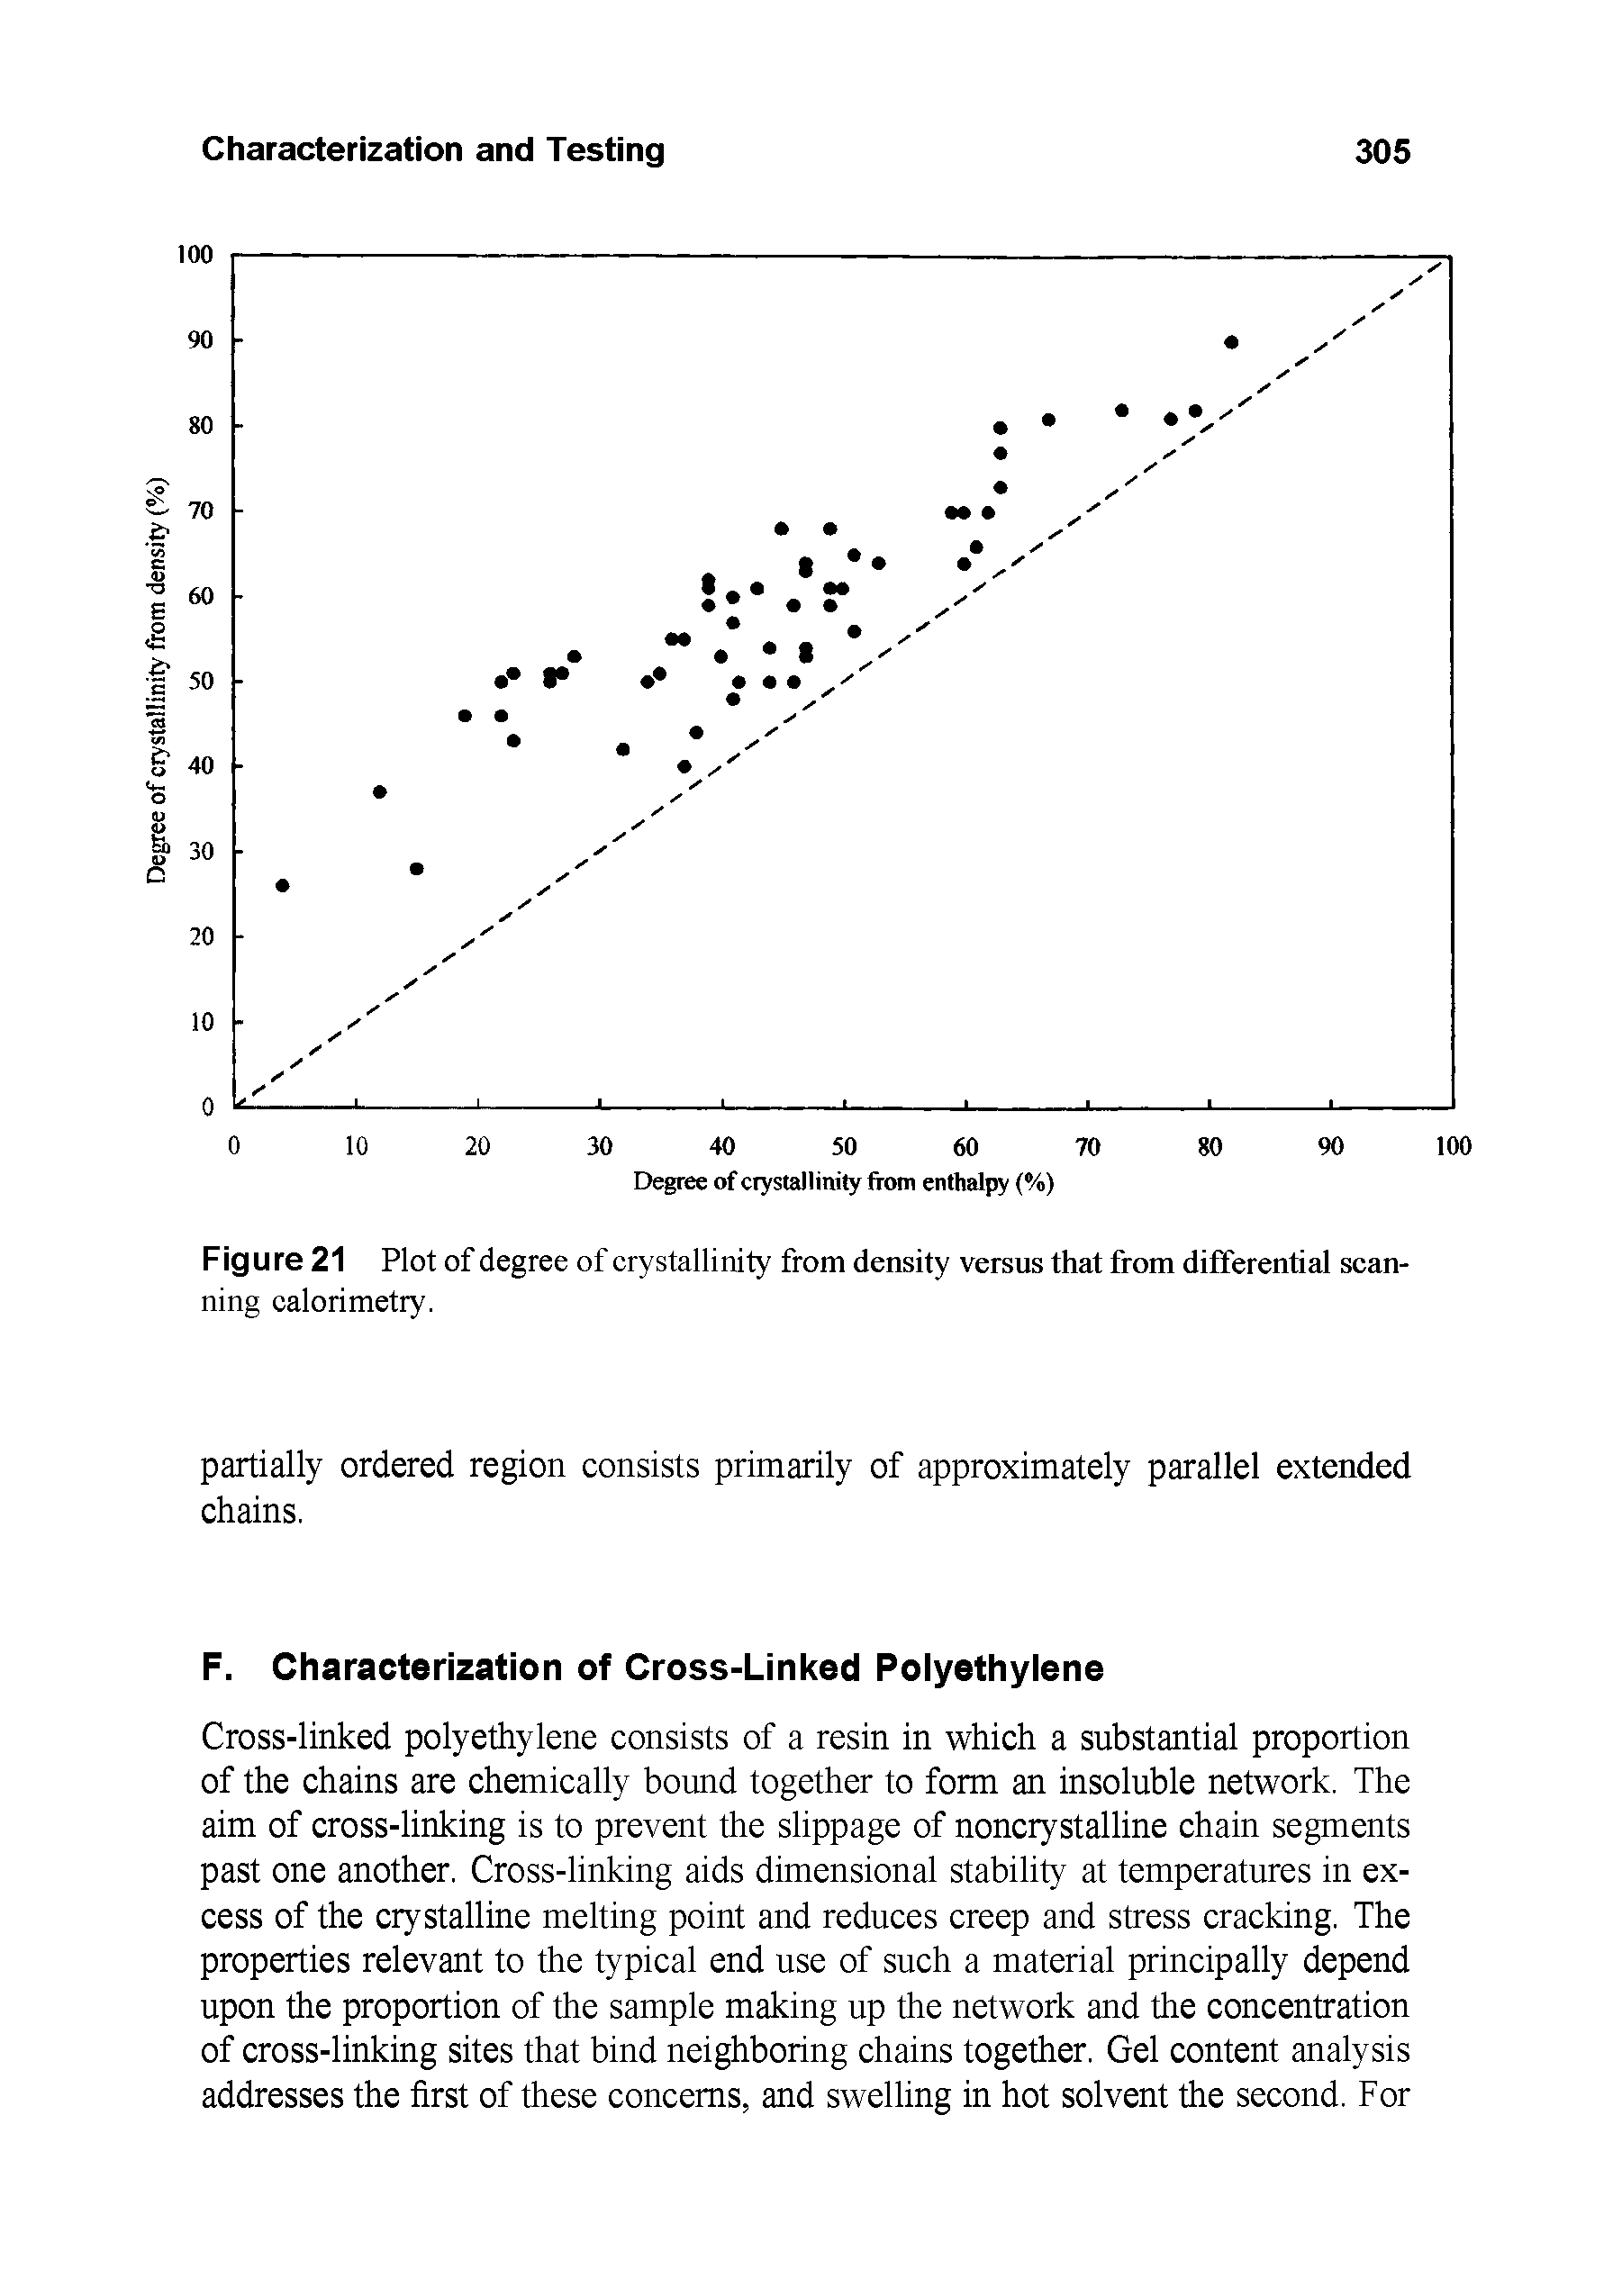 Figure 21 Plot of degree of crystallinity from density versus that from differential scanning calorimetry.